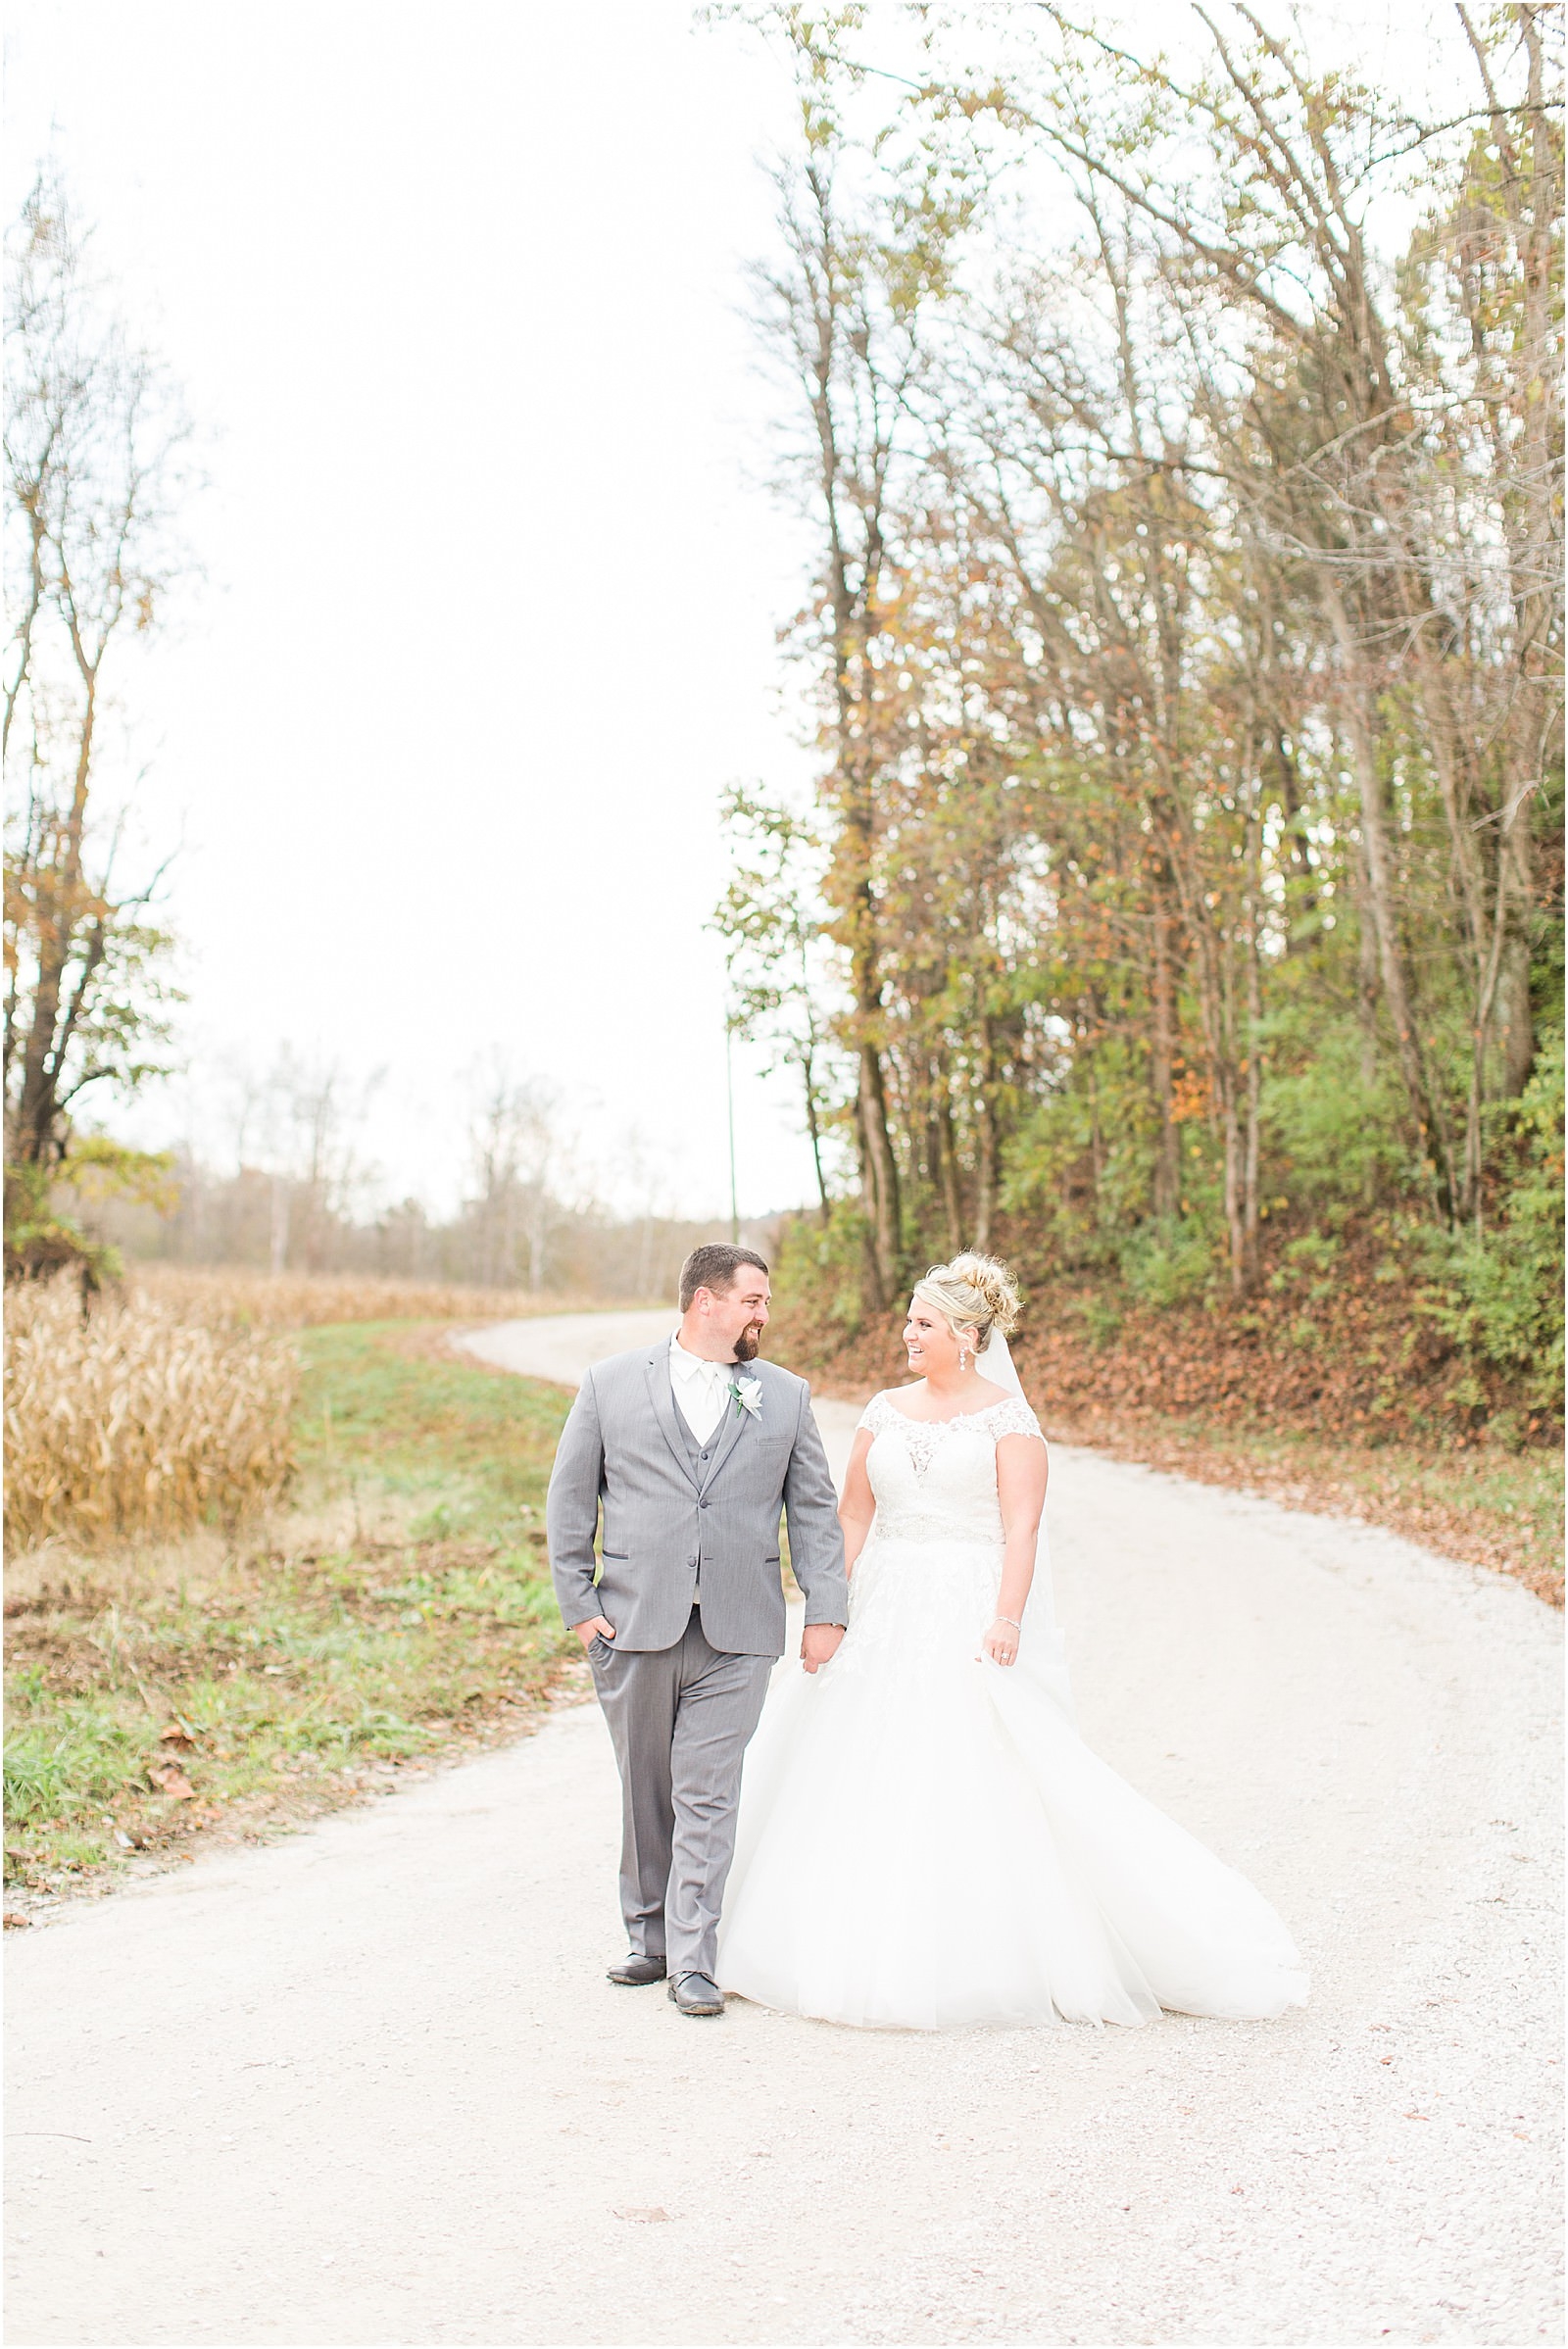 A Navy and Blush Wedding in Tell City Indiana | Brianna and Matt | Bret and Brandie Photography 0124.jpg